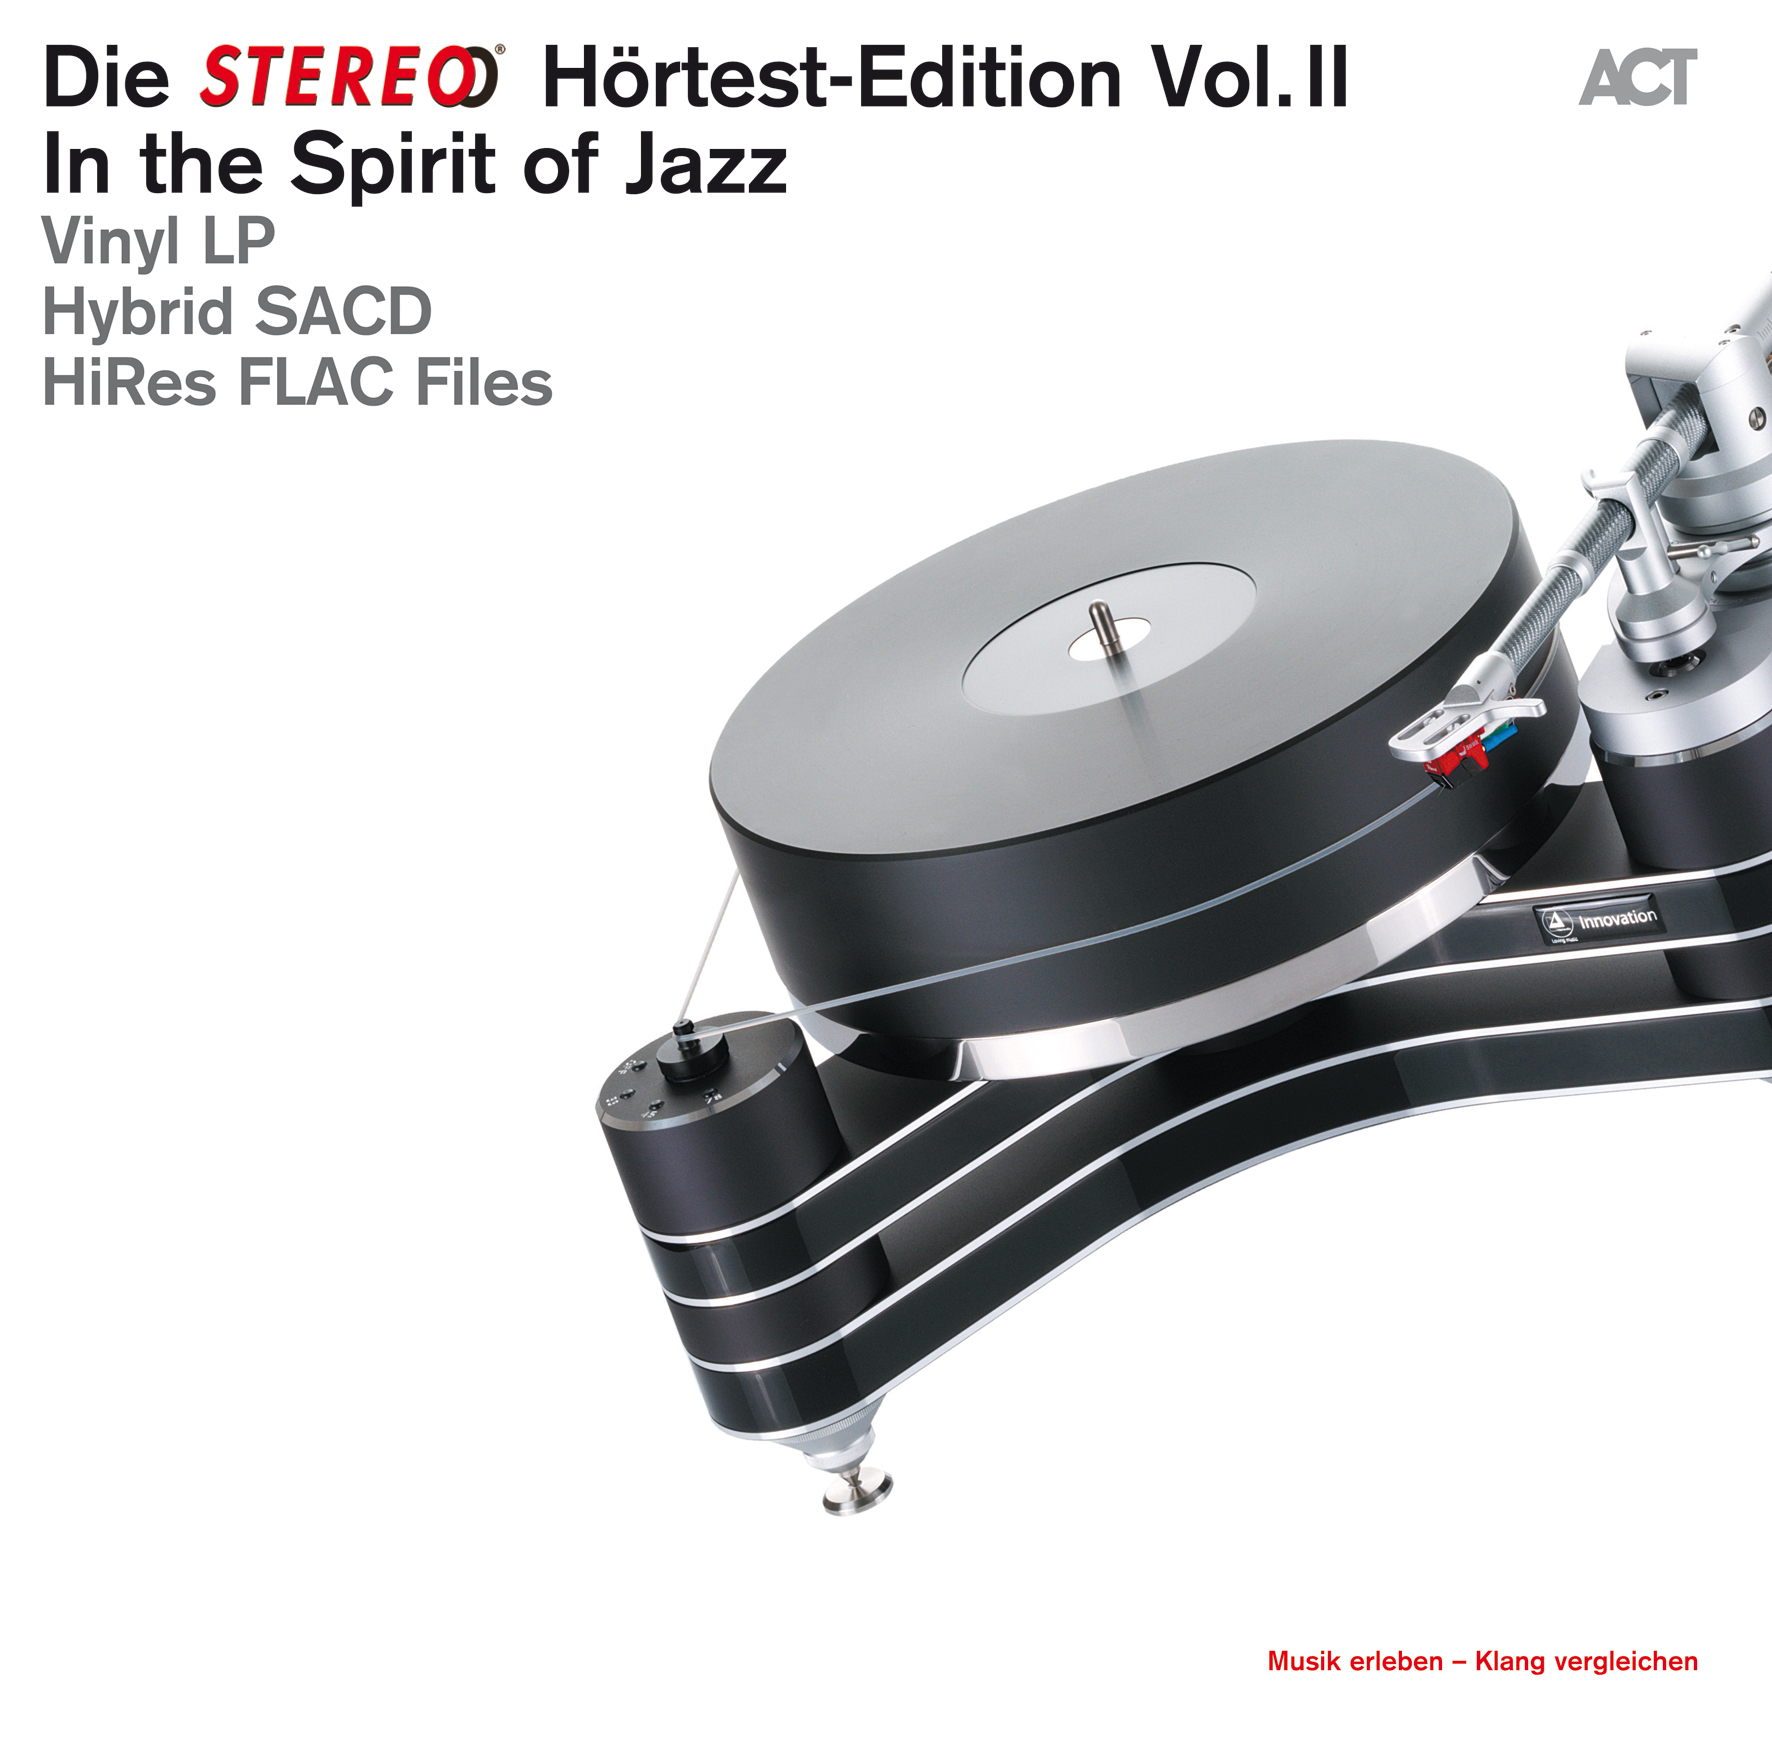 Die STEREO Hörtest-Edition Vol. II "In the Spirit of Jazz"